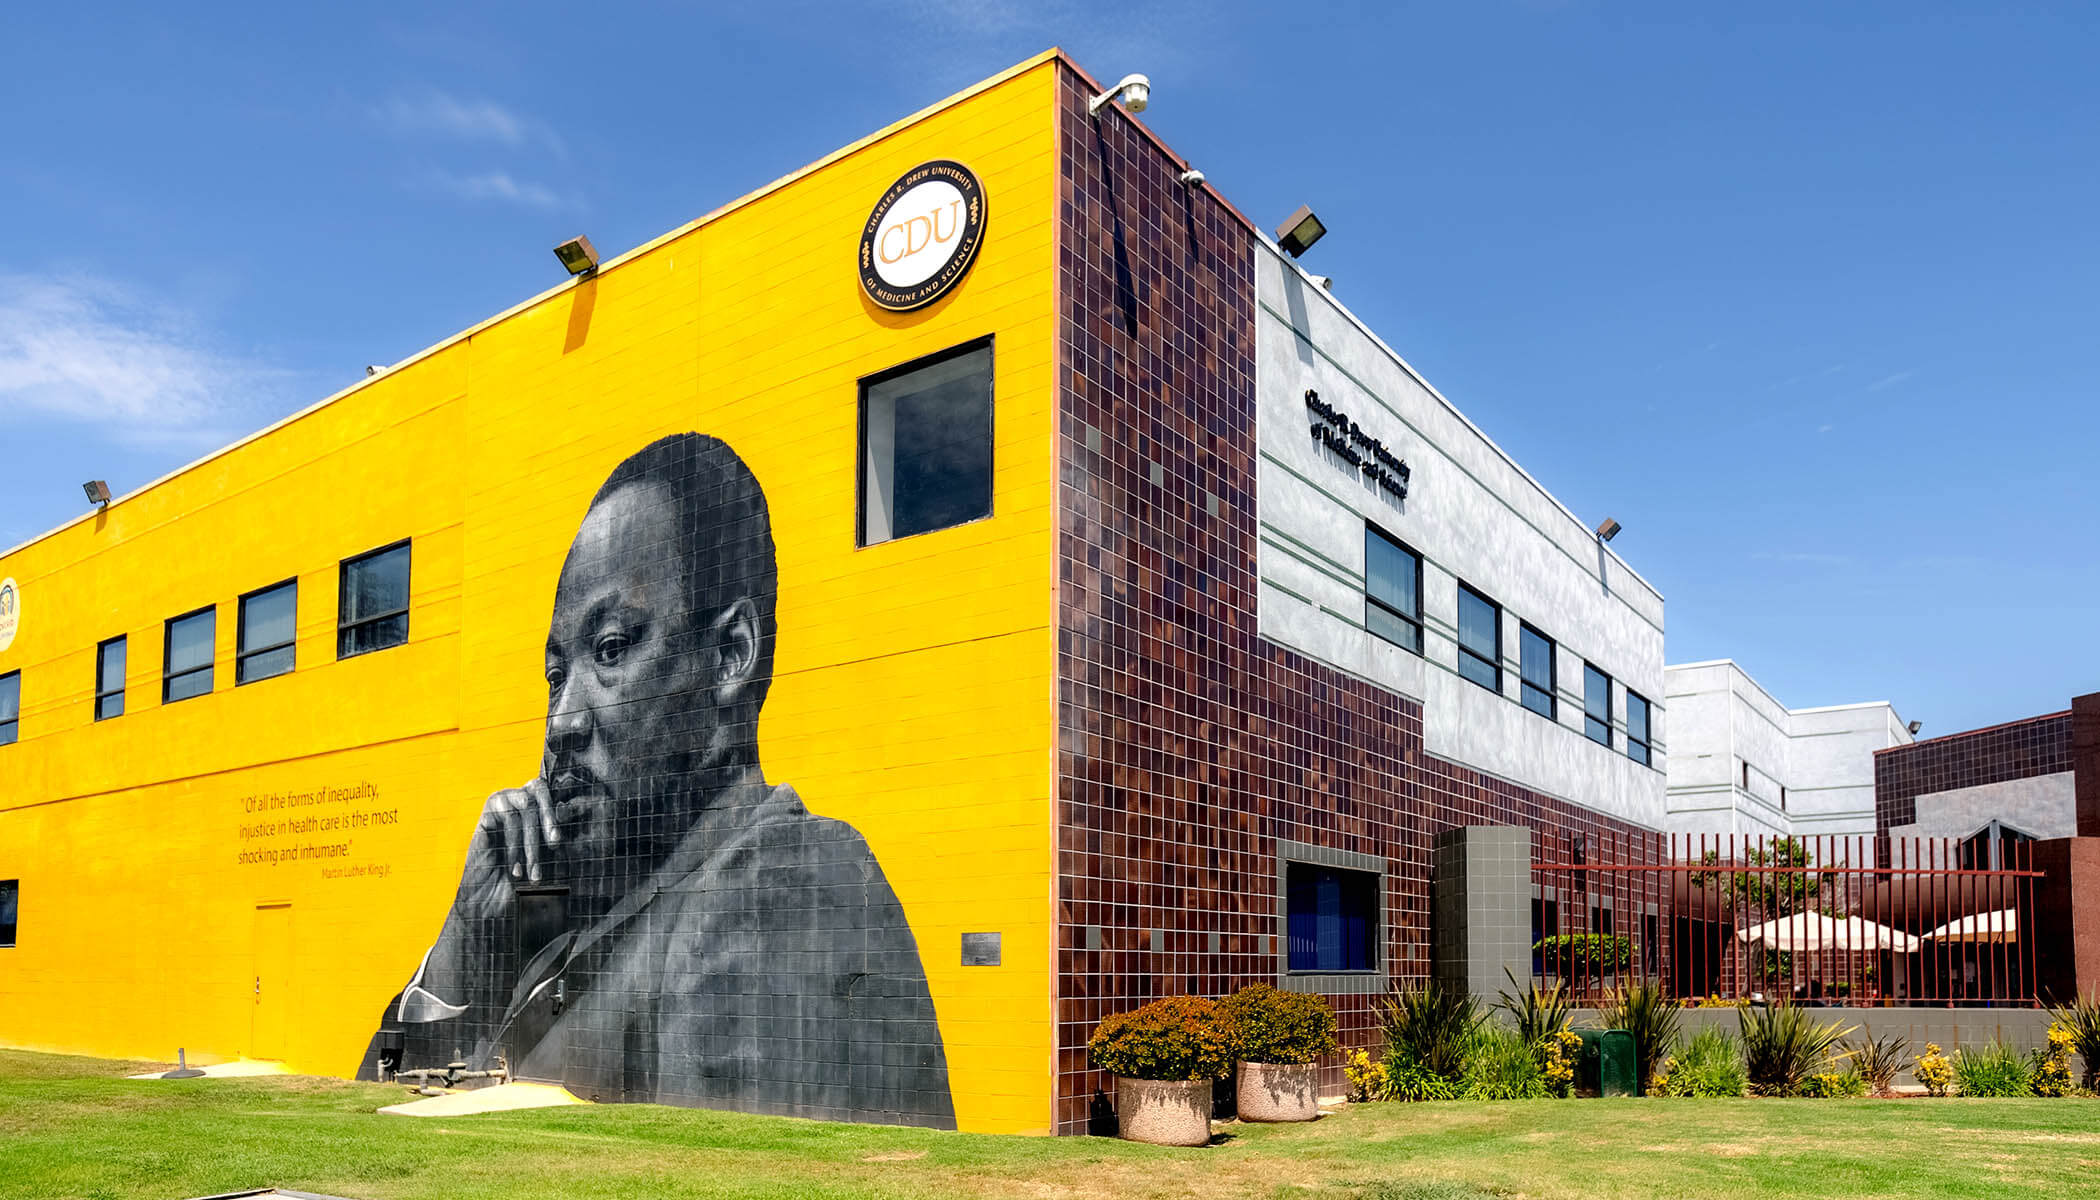 A mural of Dr. Martin Luther King, Jr. on the side of a brick building.